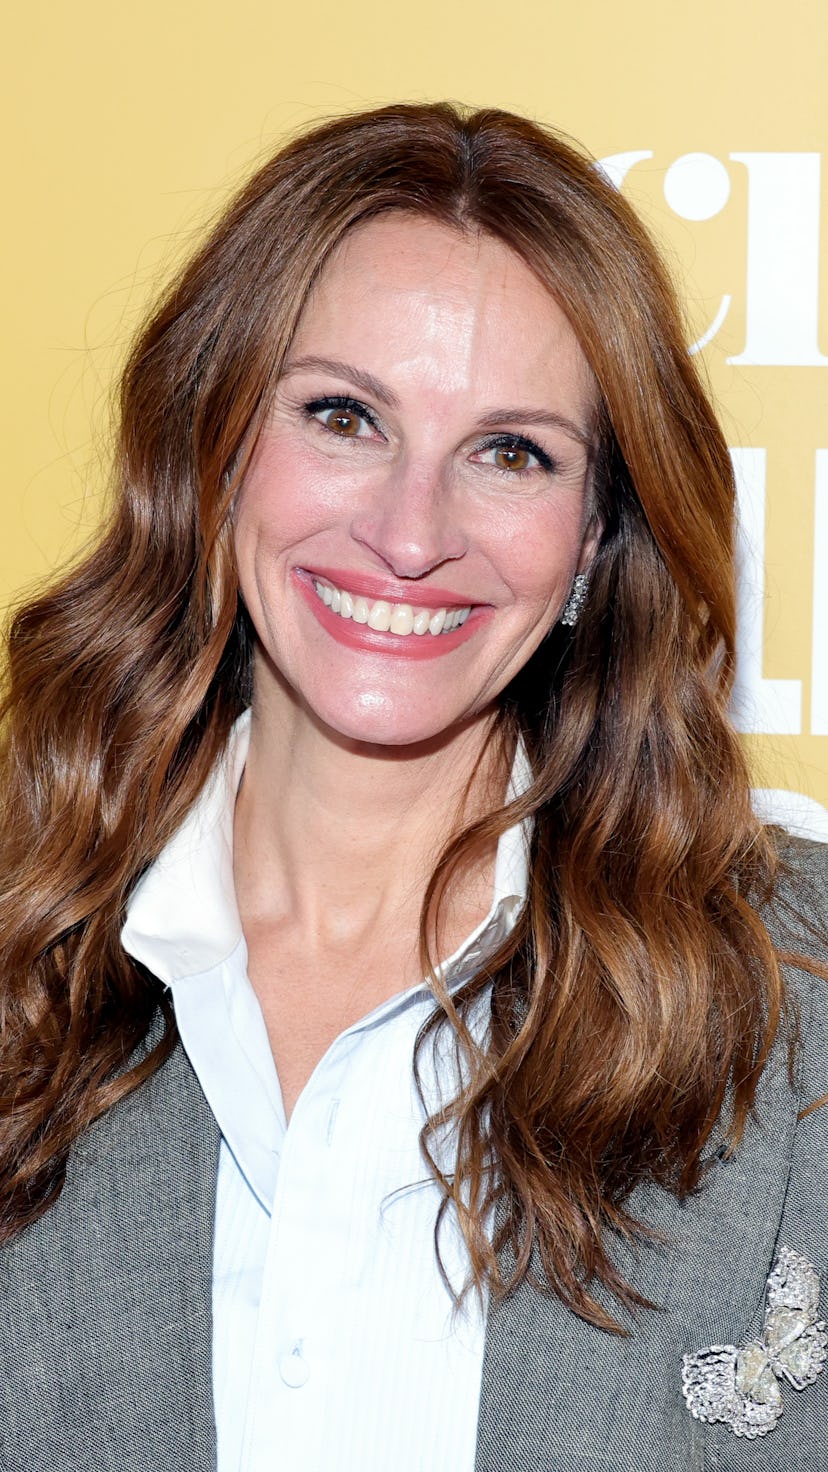 Julia Roberts has had some amazing quotes on motherhood throughout the years.